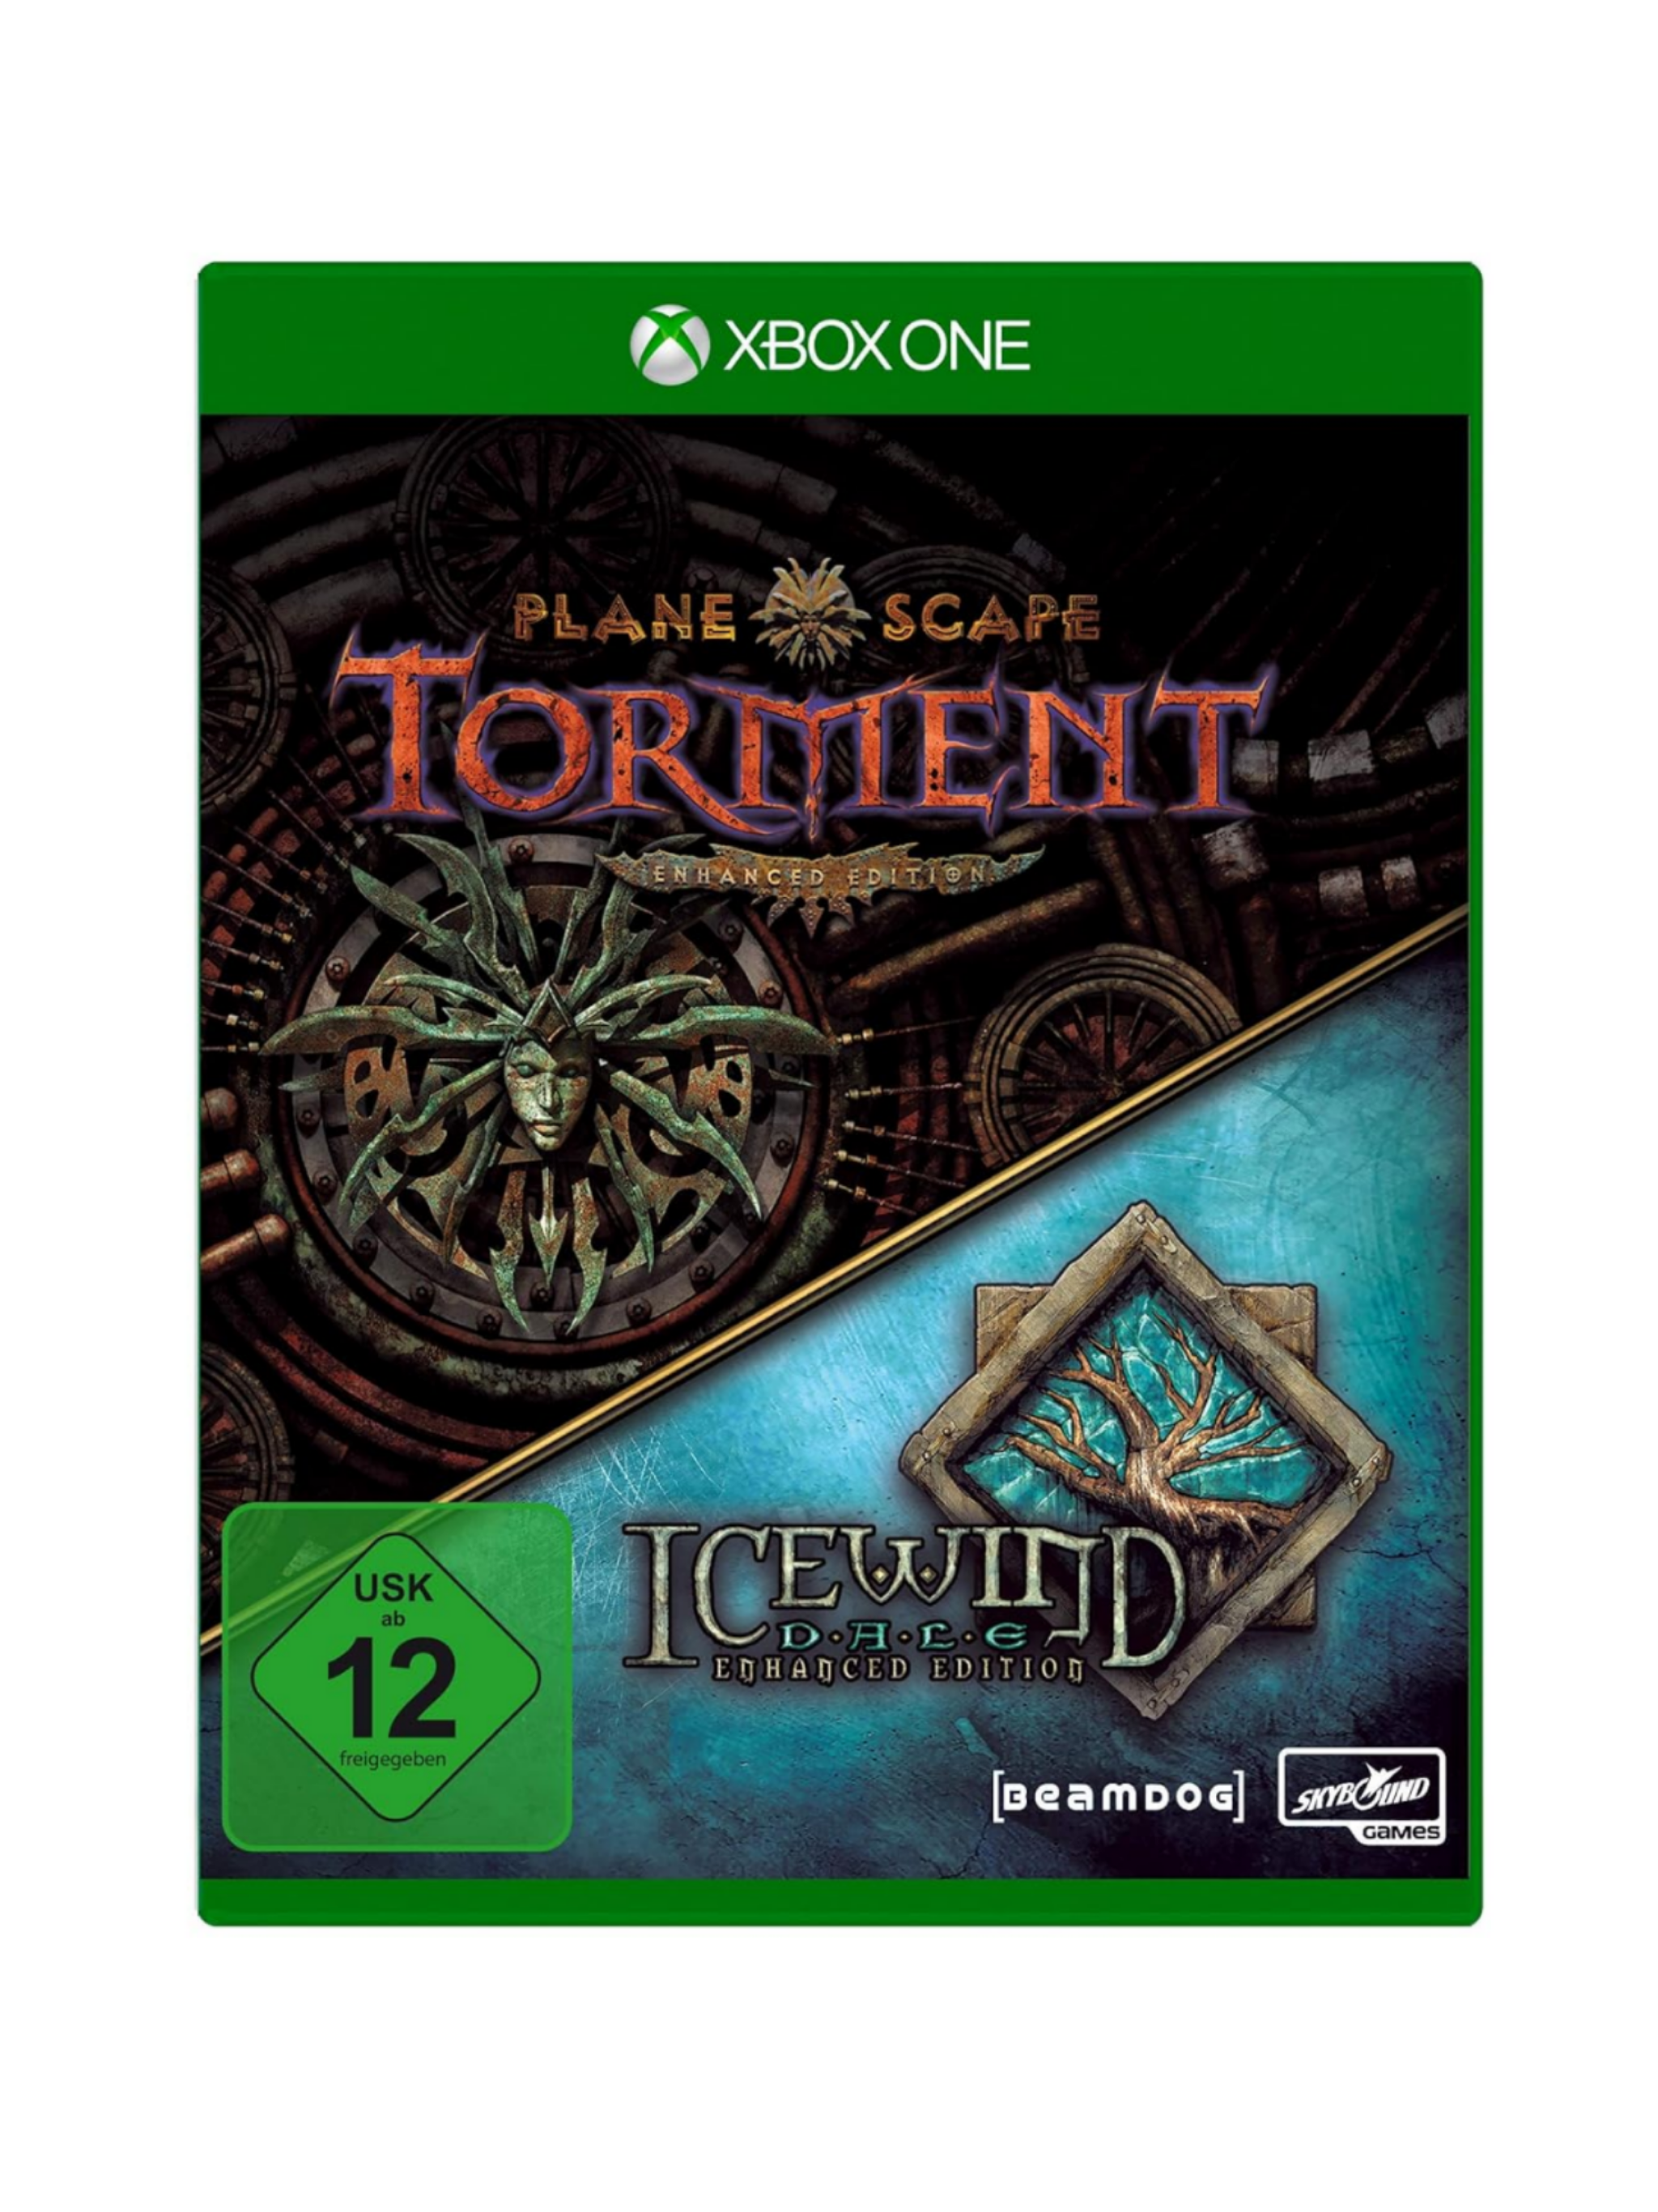 Skybound Planescape: Torment & Icewind Dale Enhanced Edition